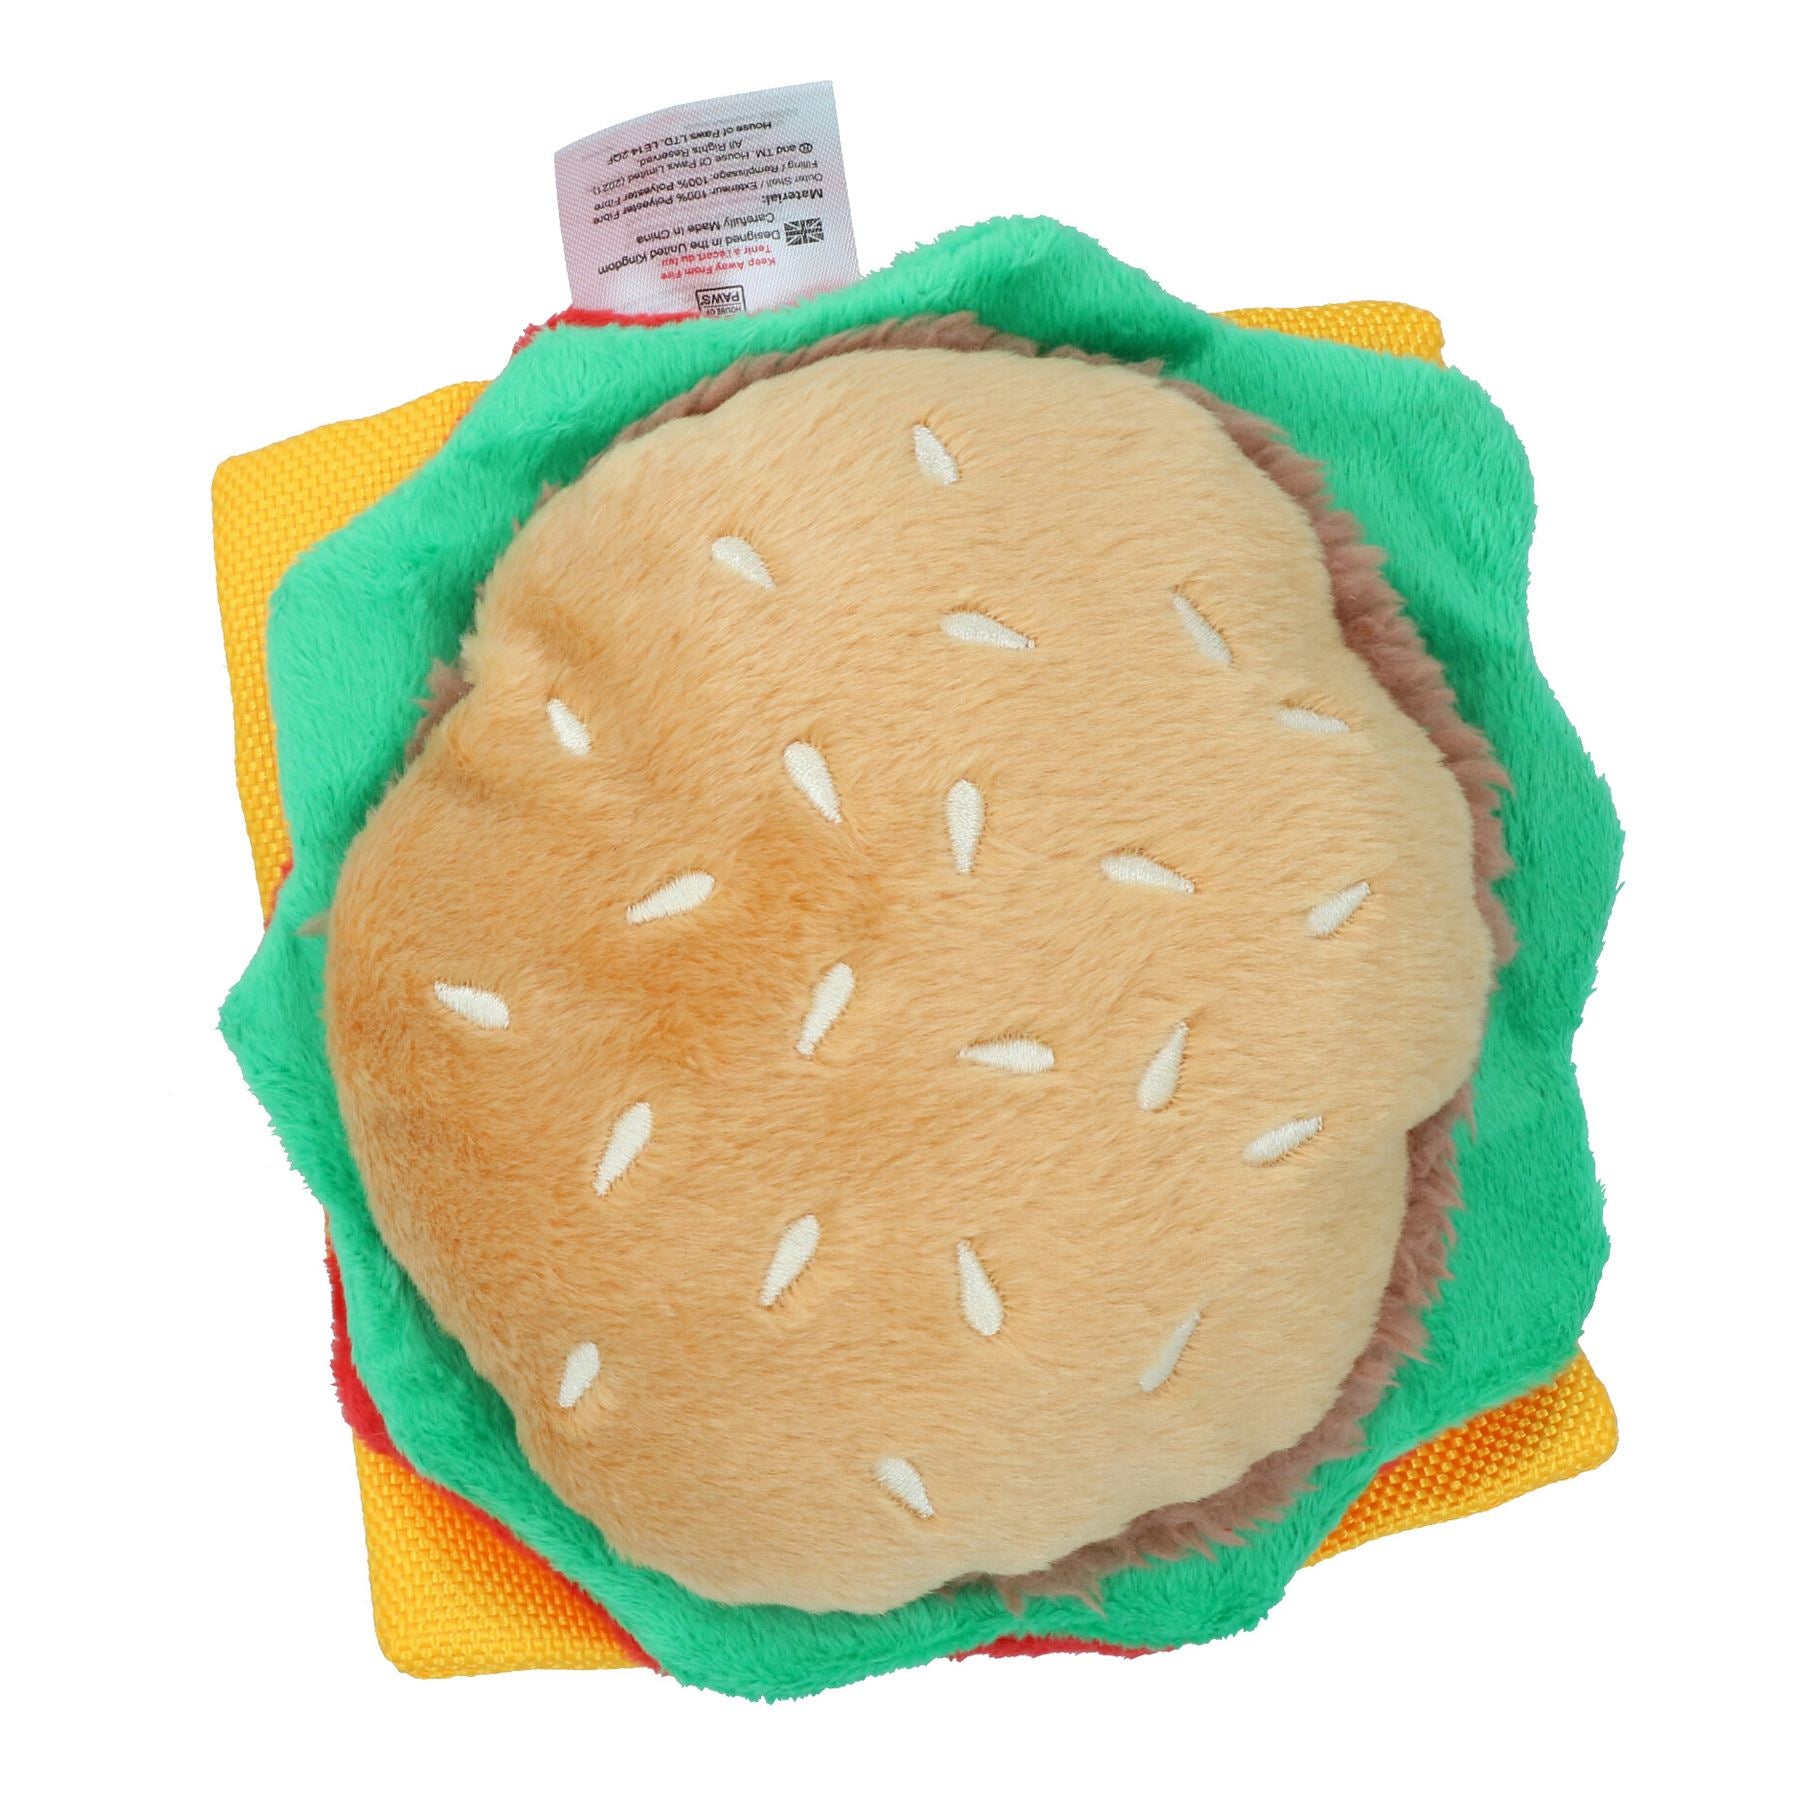 Dog Puppy Gift Beef Burger Food Themed Soft Plush Squeaky Toy Present